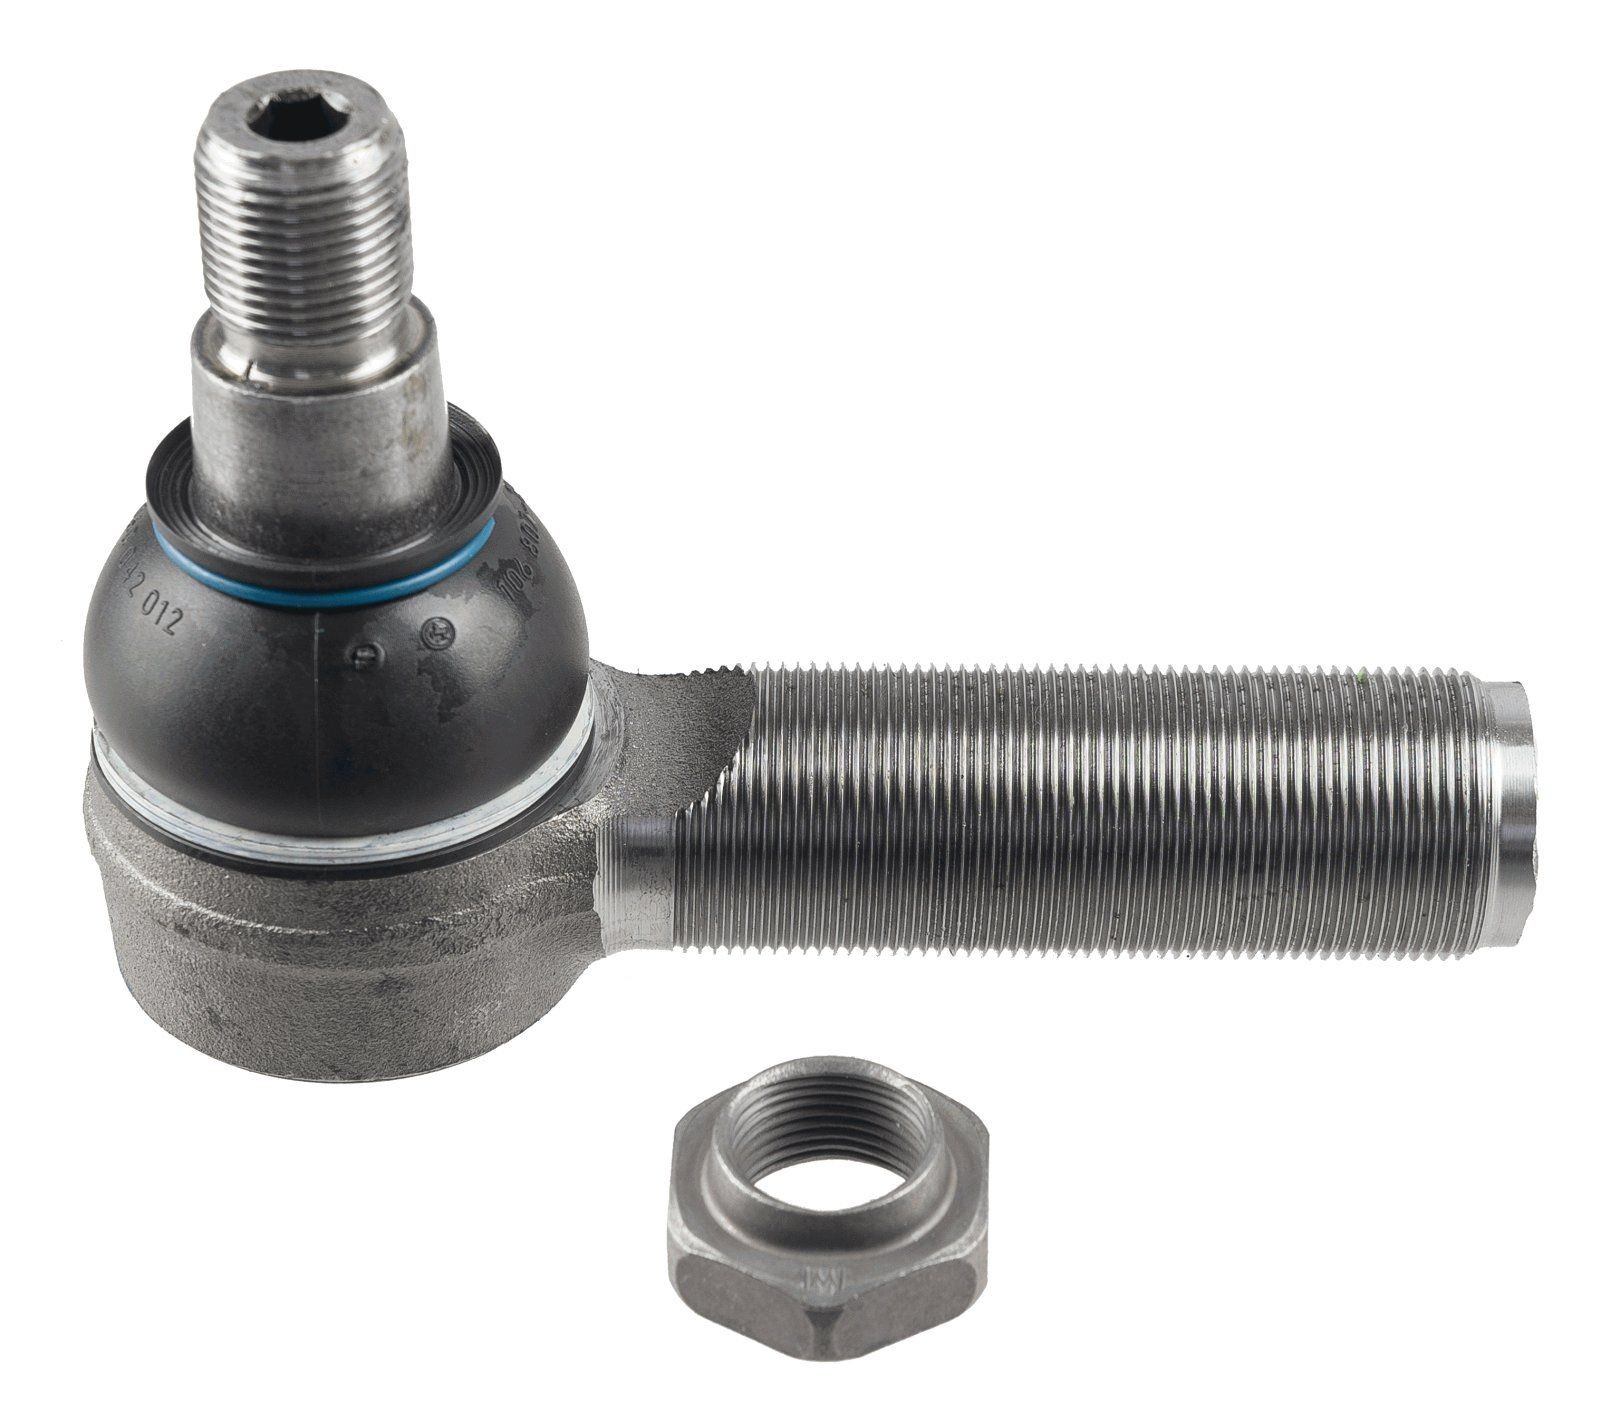 C:26/TH:M30x1,5L/L:115 LEMFÖRDER Cone Size 26 mm, Front Axle, with accessories Cone Size: 26mm, Thread Type: with left-hand thread, Thread Size: M30x1,5 Tie rod end 11403 02 buy